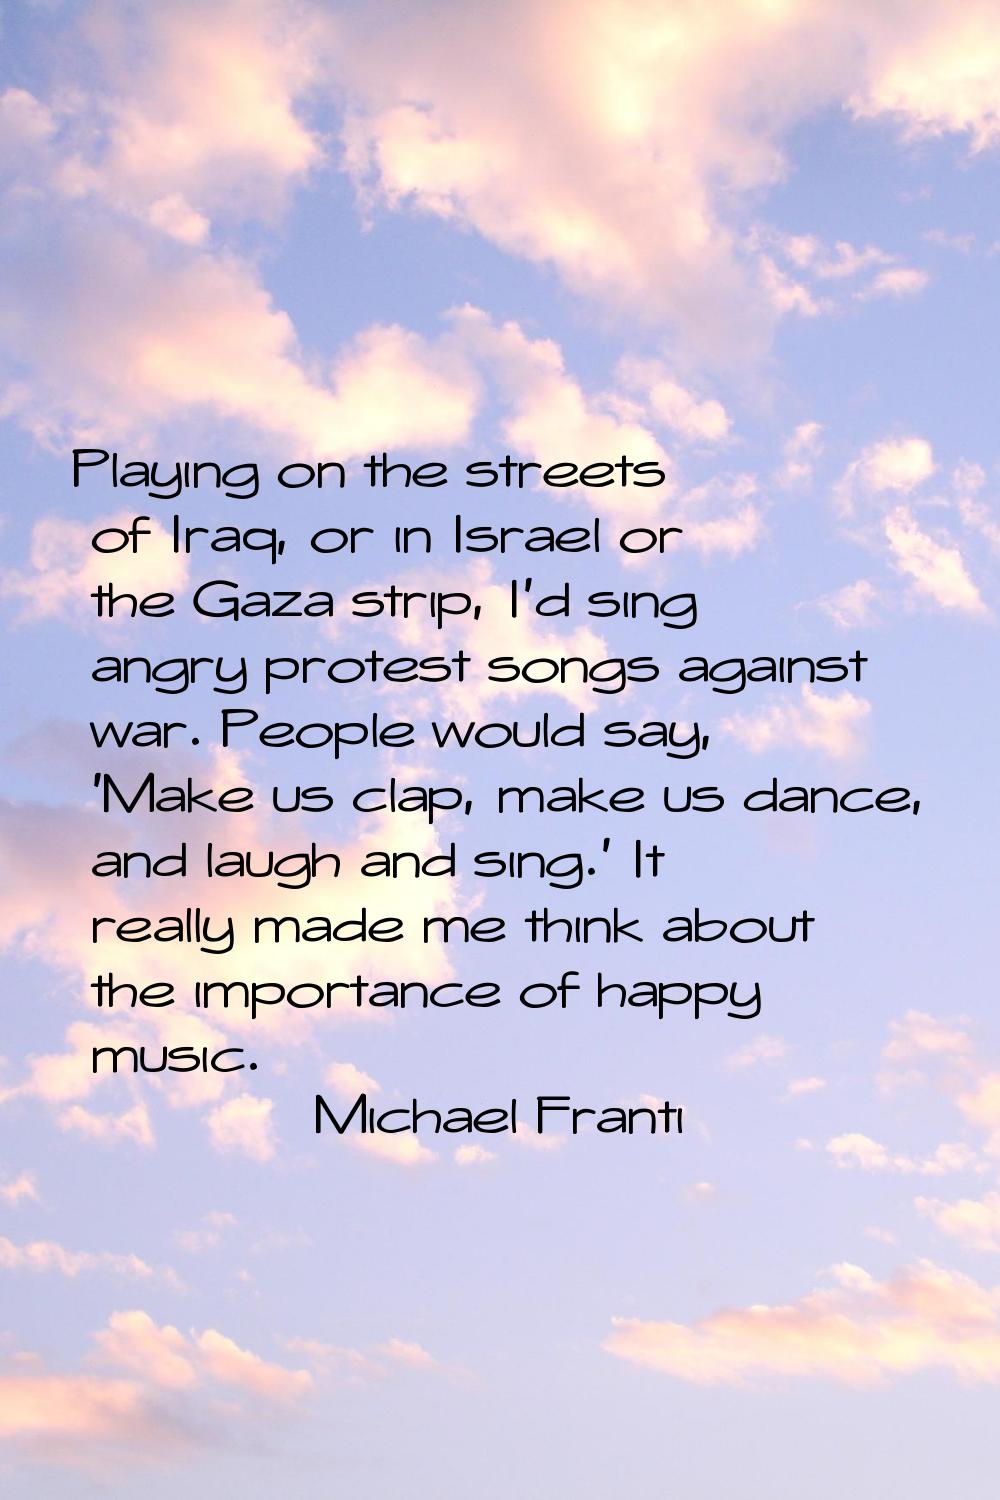 Playing on the streets of Iraq, or in Israel or the Gaza strip, I'd sing angry protest songs agains